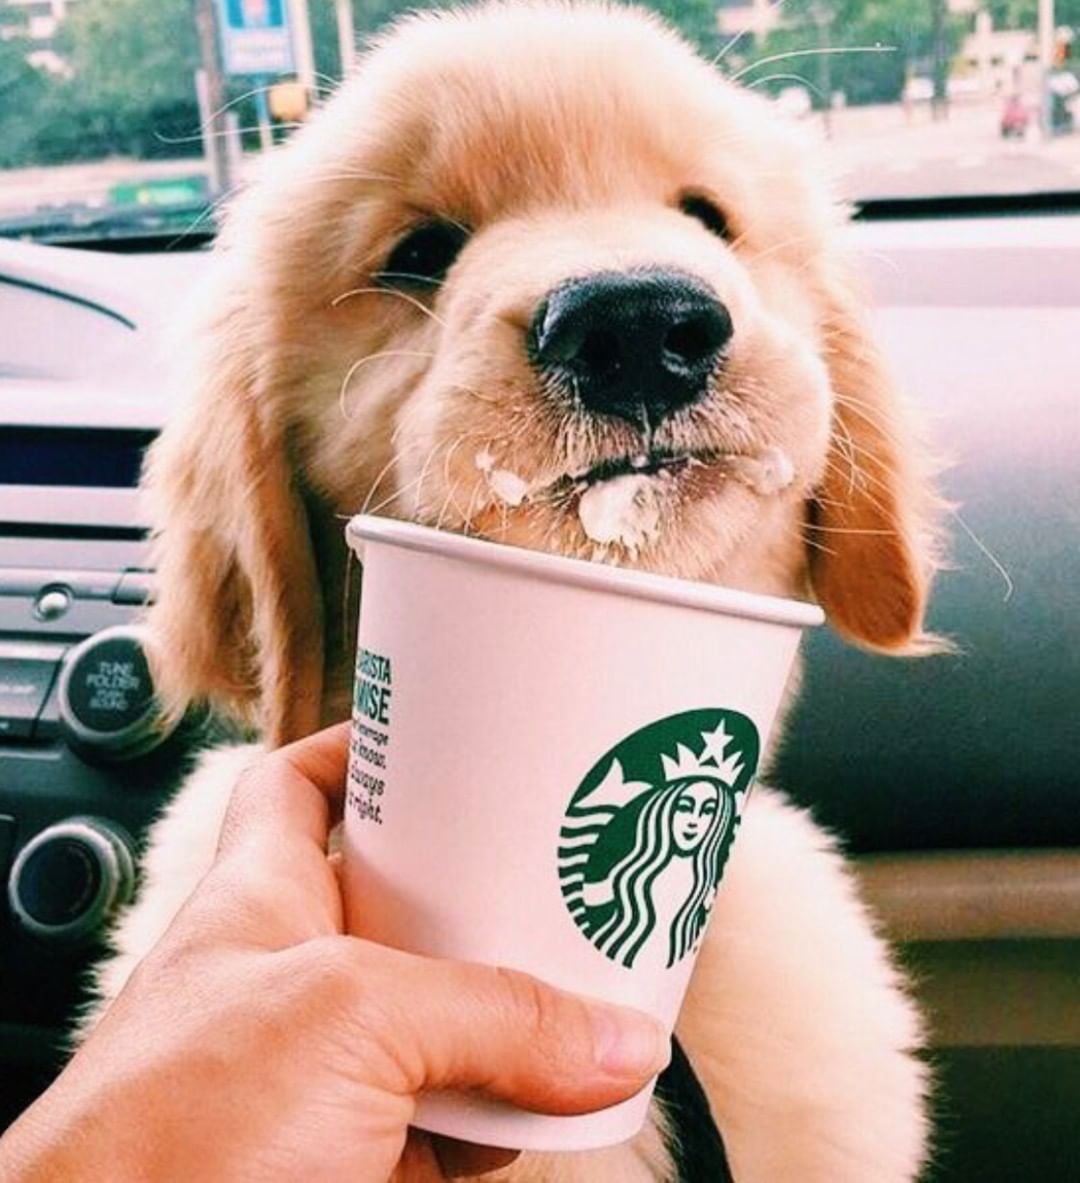 pink aesthetic, summer vibes, summer aesthetic, cute puppies, golden retriever puppy, starbucks, coffee ae. Cute puppy wallpaper, Cute funny animals, Cute animals